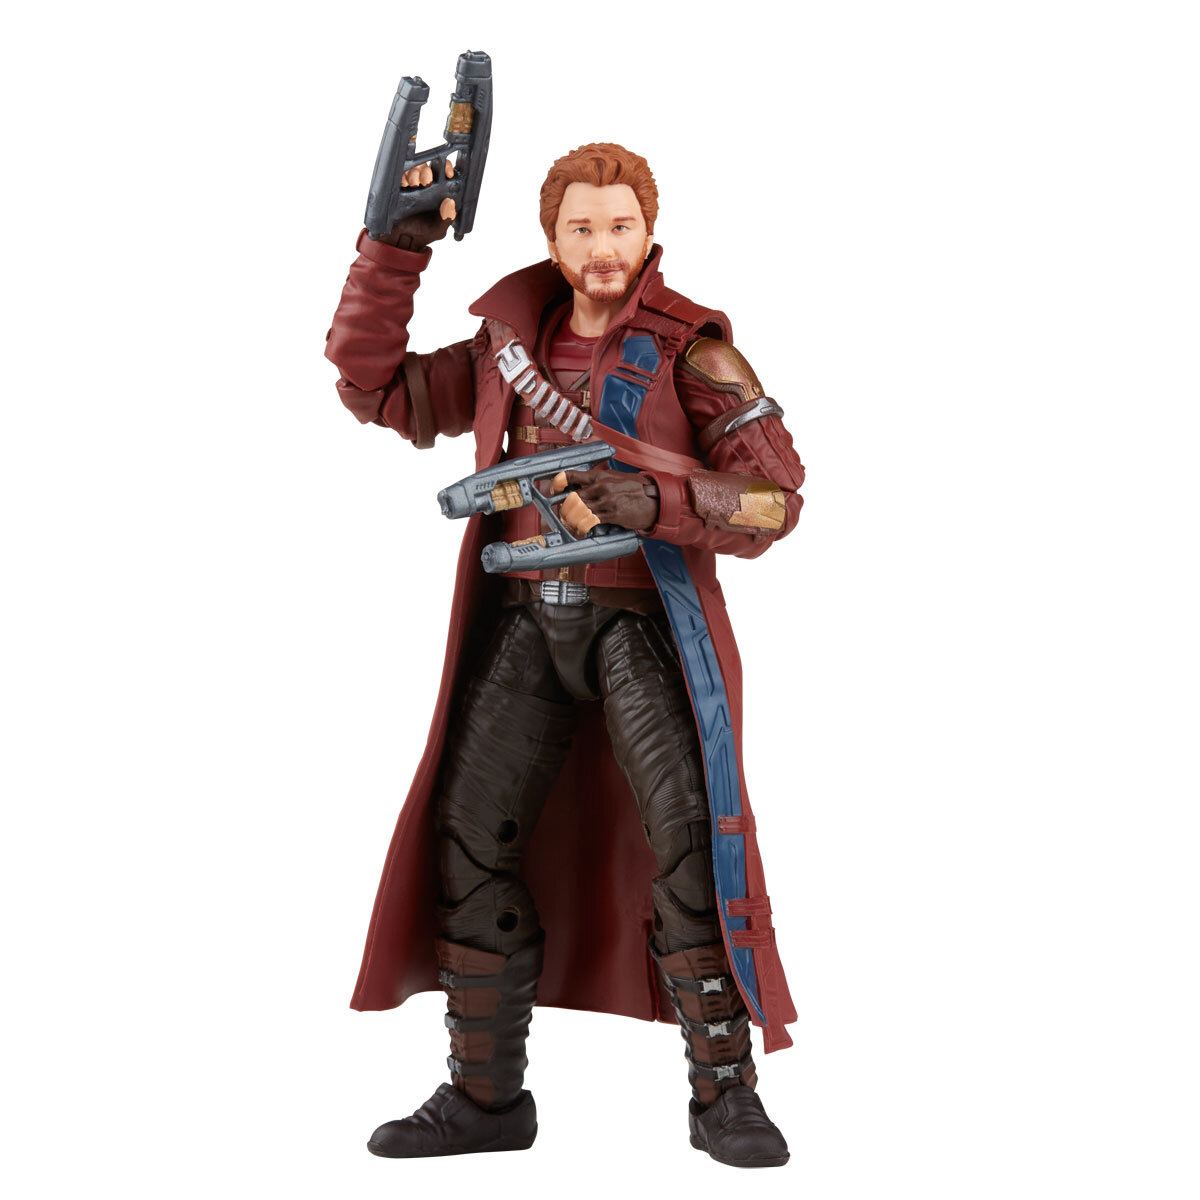 Marvel Legends Thor: Love and Thunder Star-Lord Action Figure 6